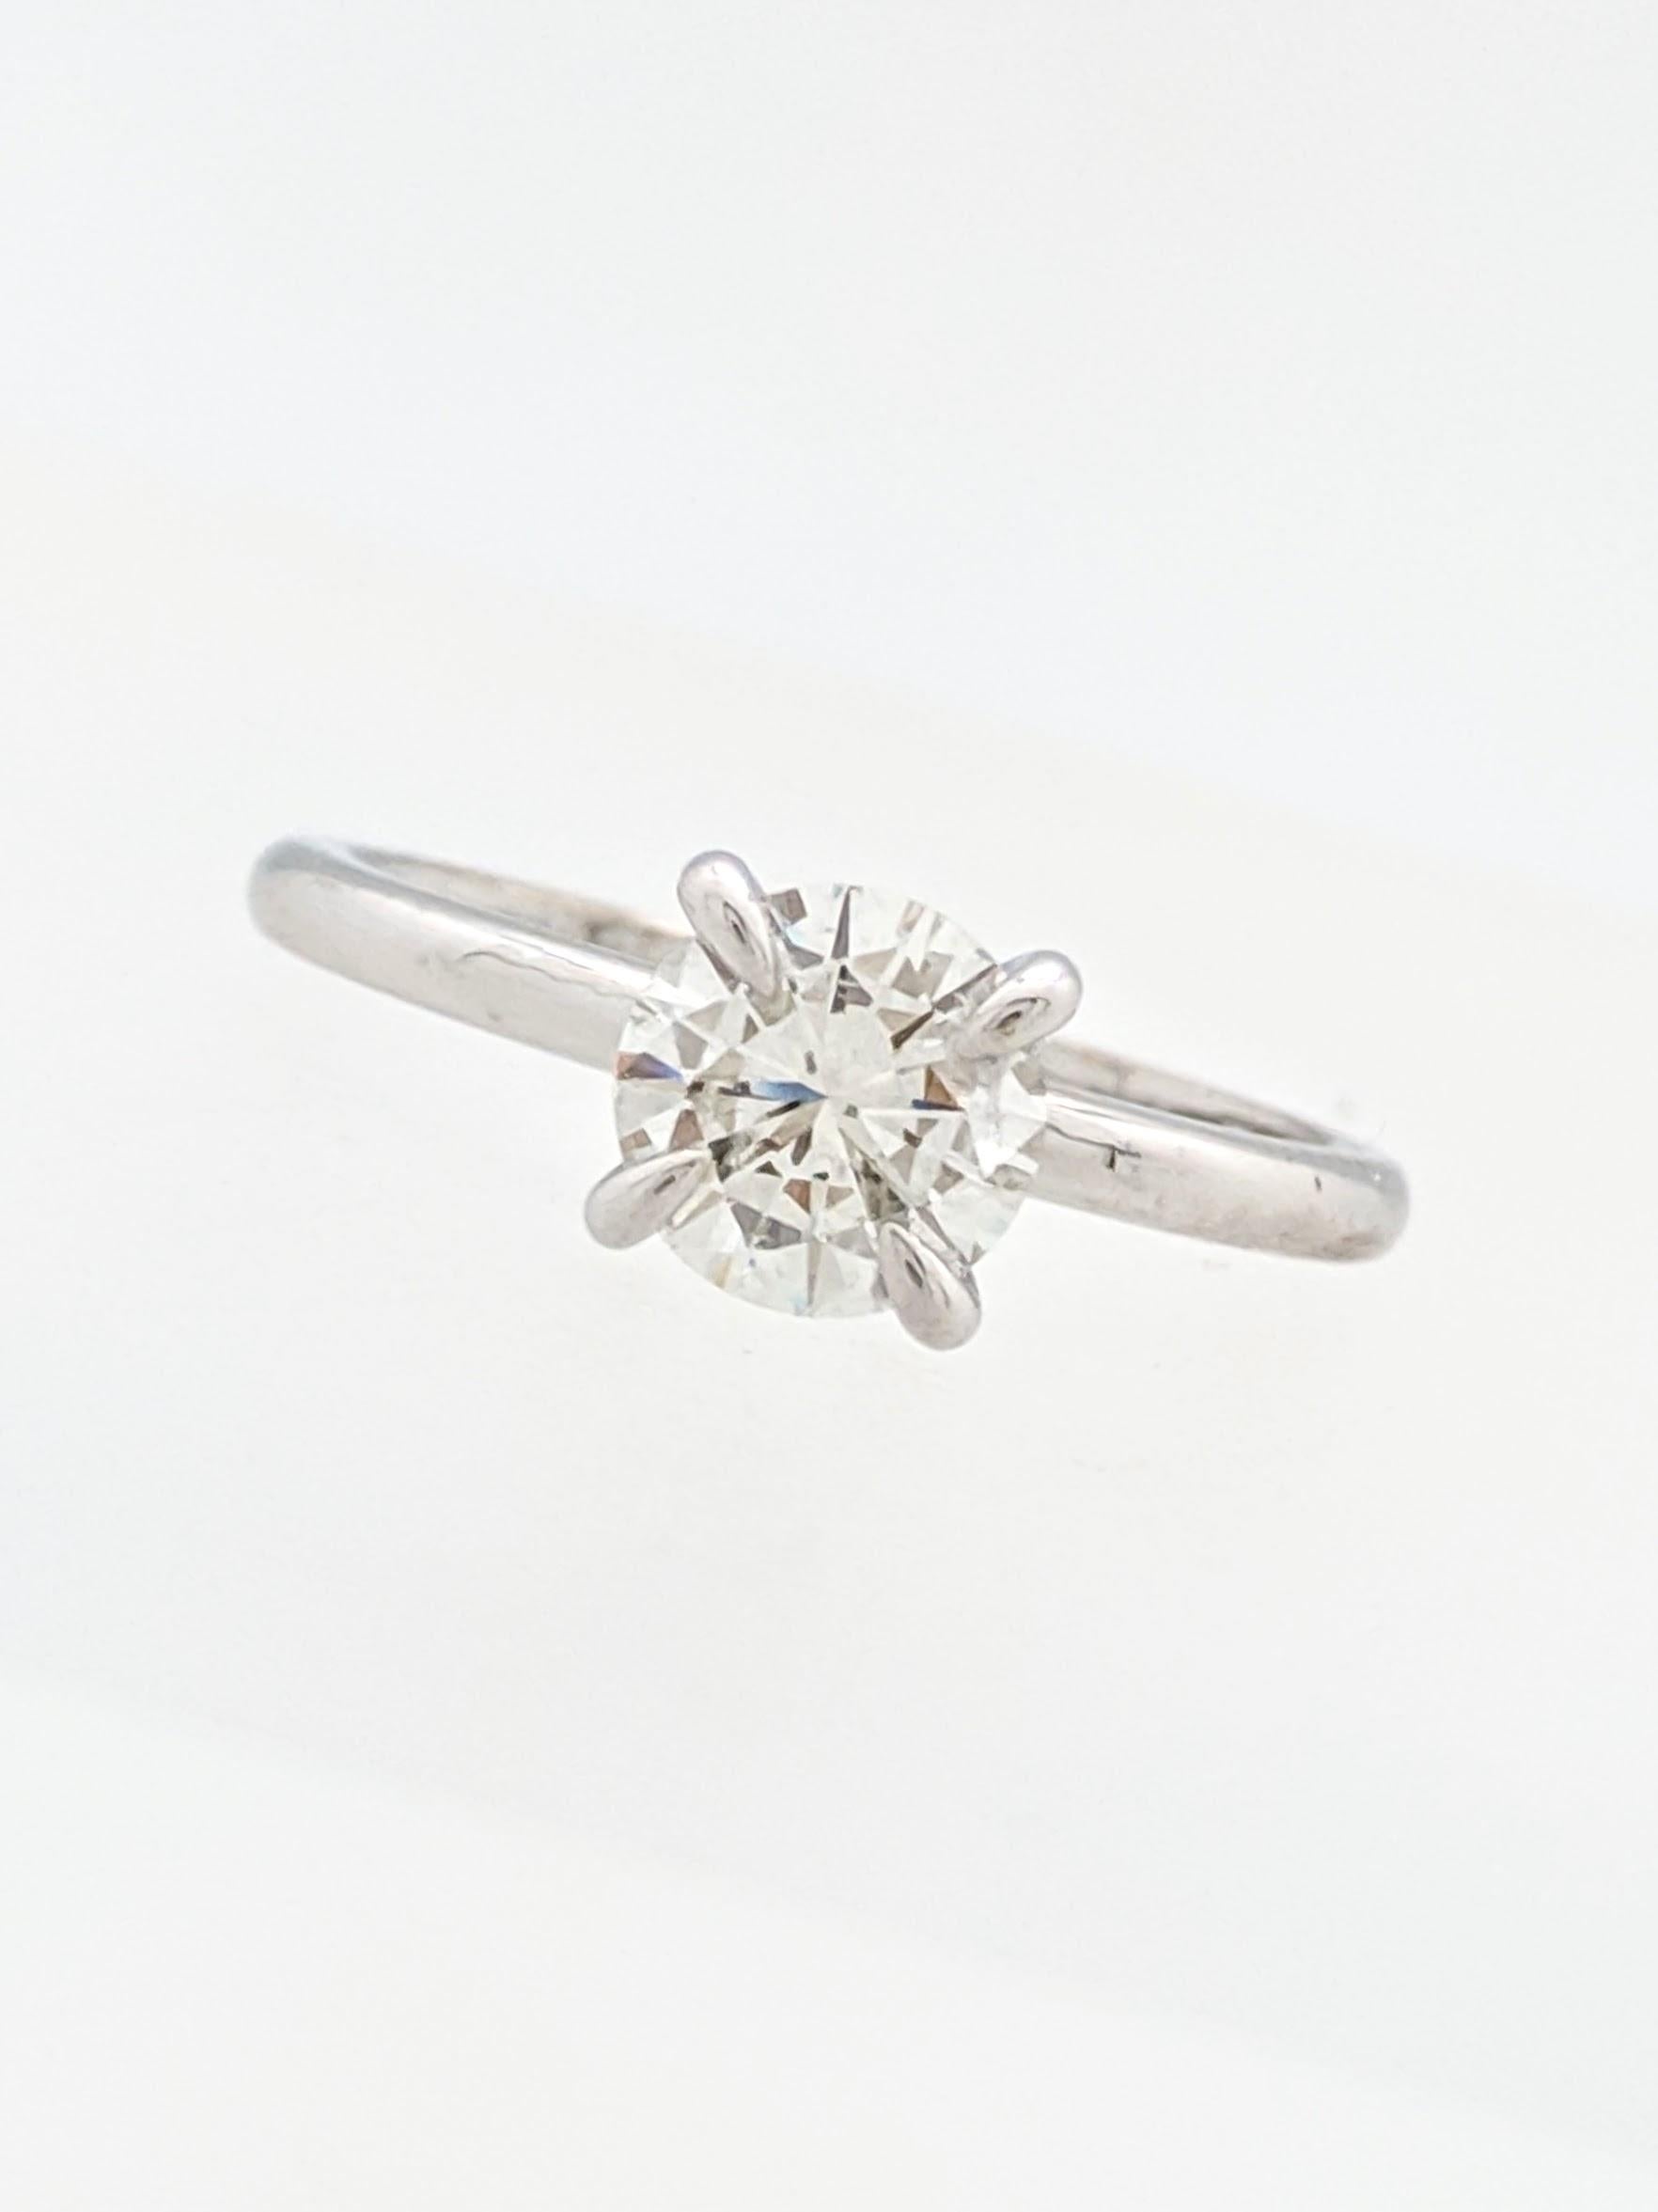 Contemporary 1.02 Carat Round Brilliant Cut Natural Diamond Ring GIA Certified SI1/J For Sale